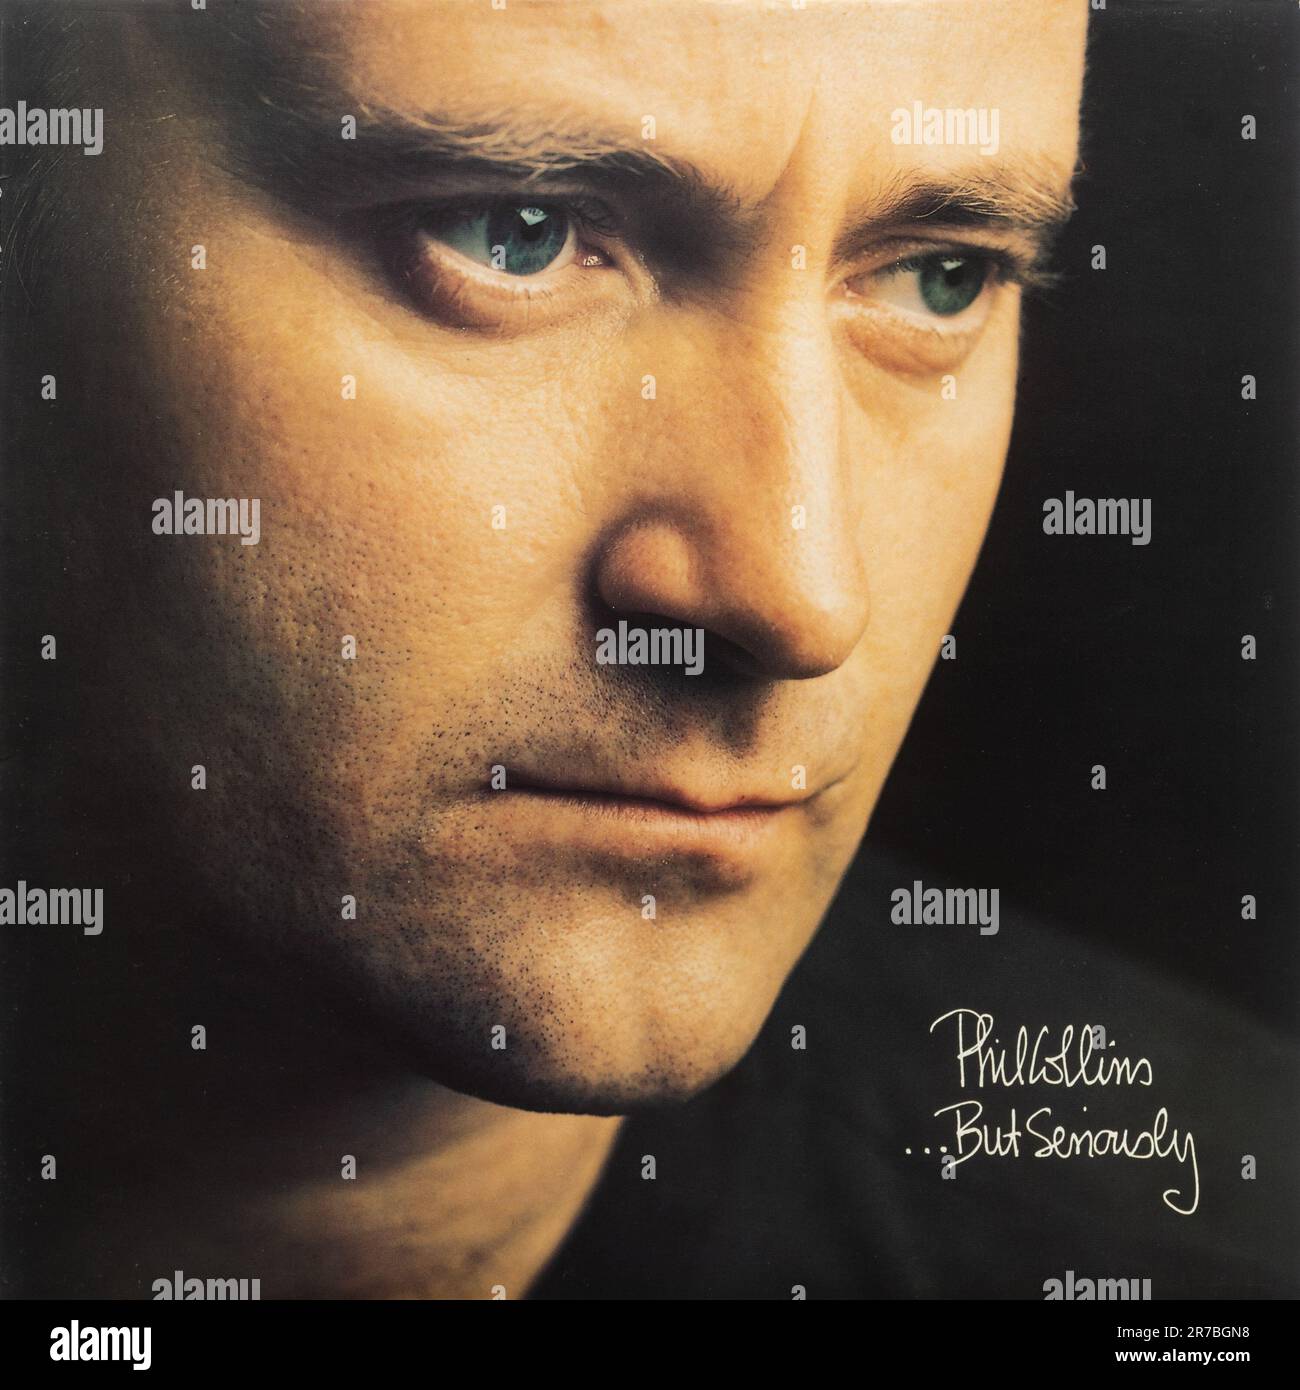 But Seriously album by Phil Collins, vinyl record cover Stock Photo